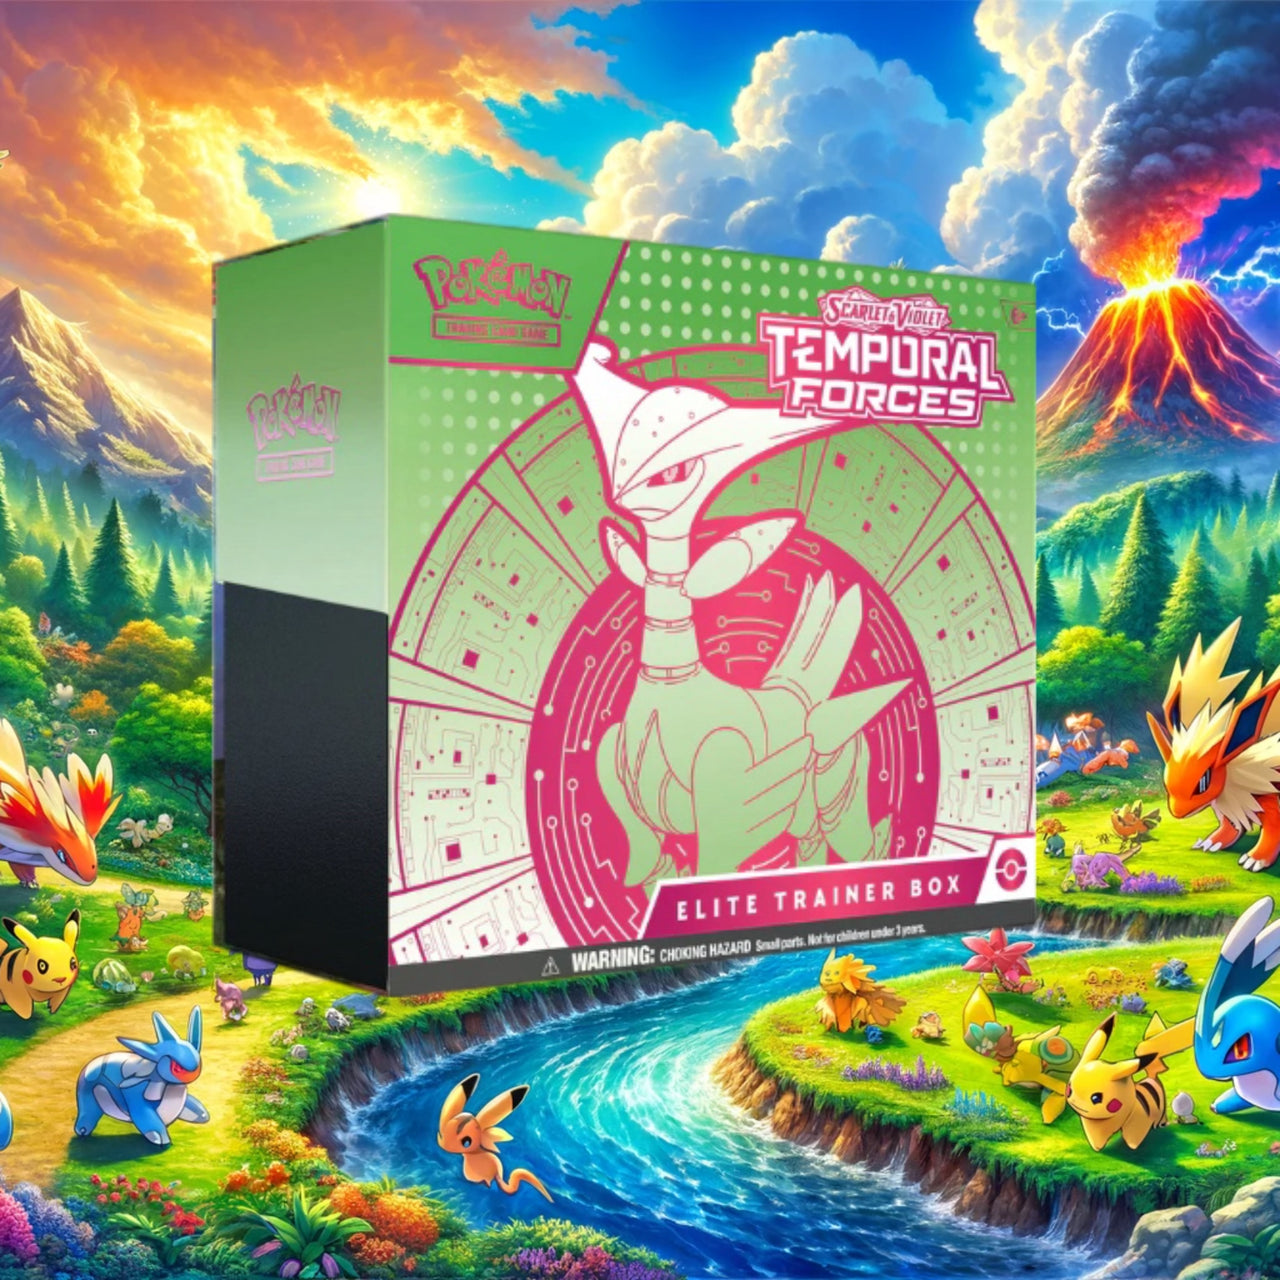 Scarlet and Violet Temporal Forces Eilte Trainer Box- Iron Leaves